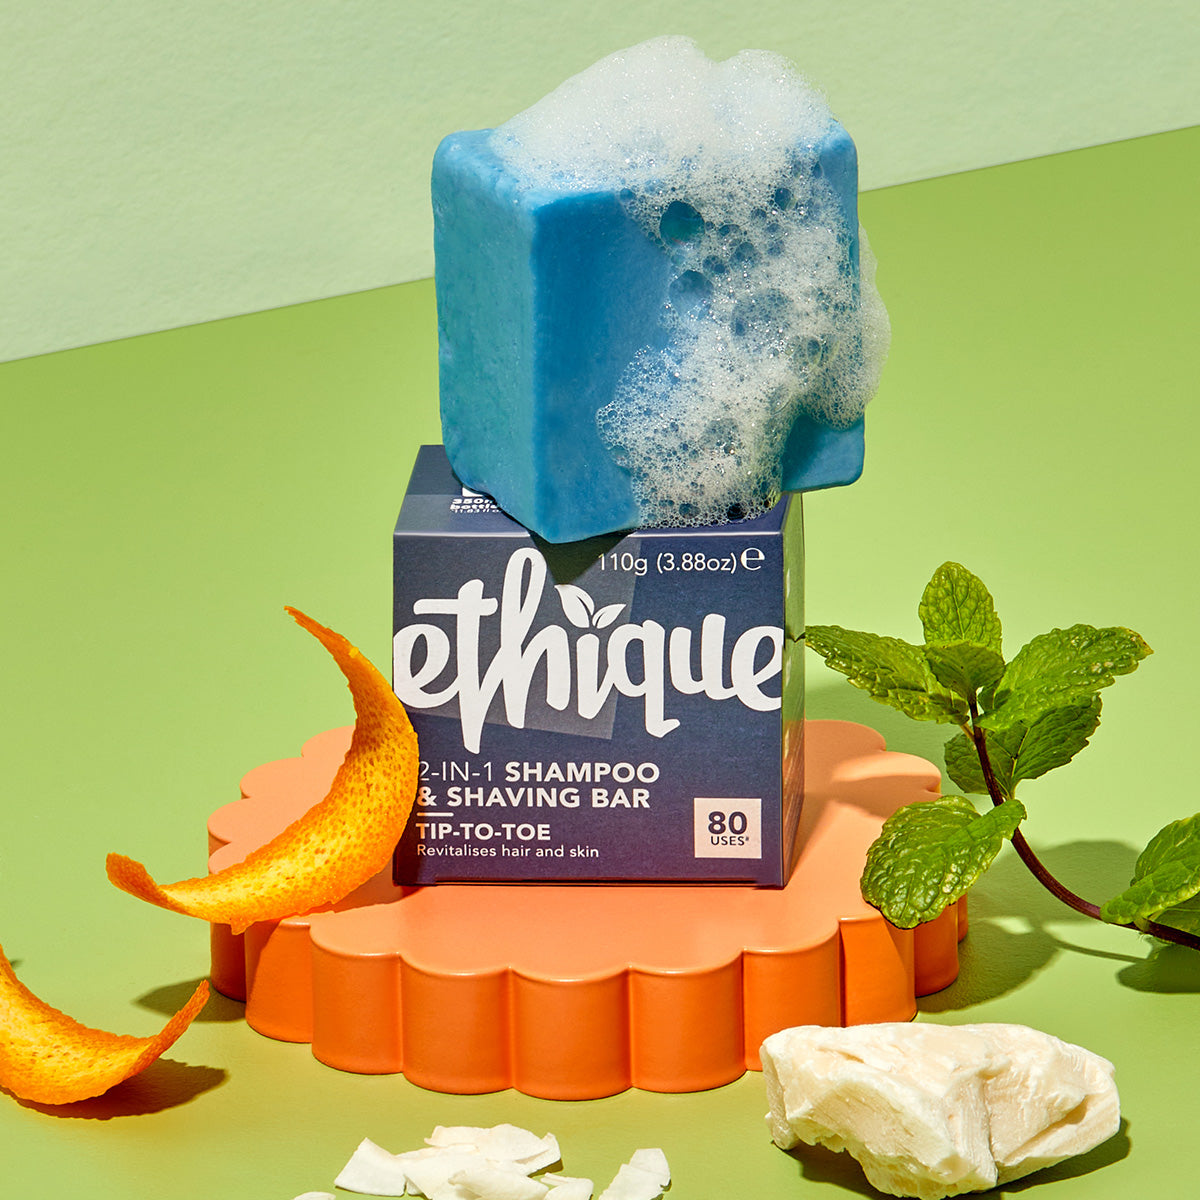 Tip-to-Toe™ 2-In-1 Solid Shampoo & Shaving Bar